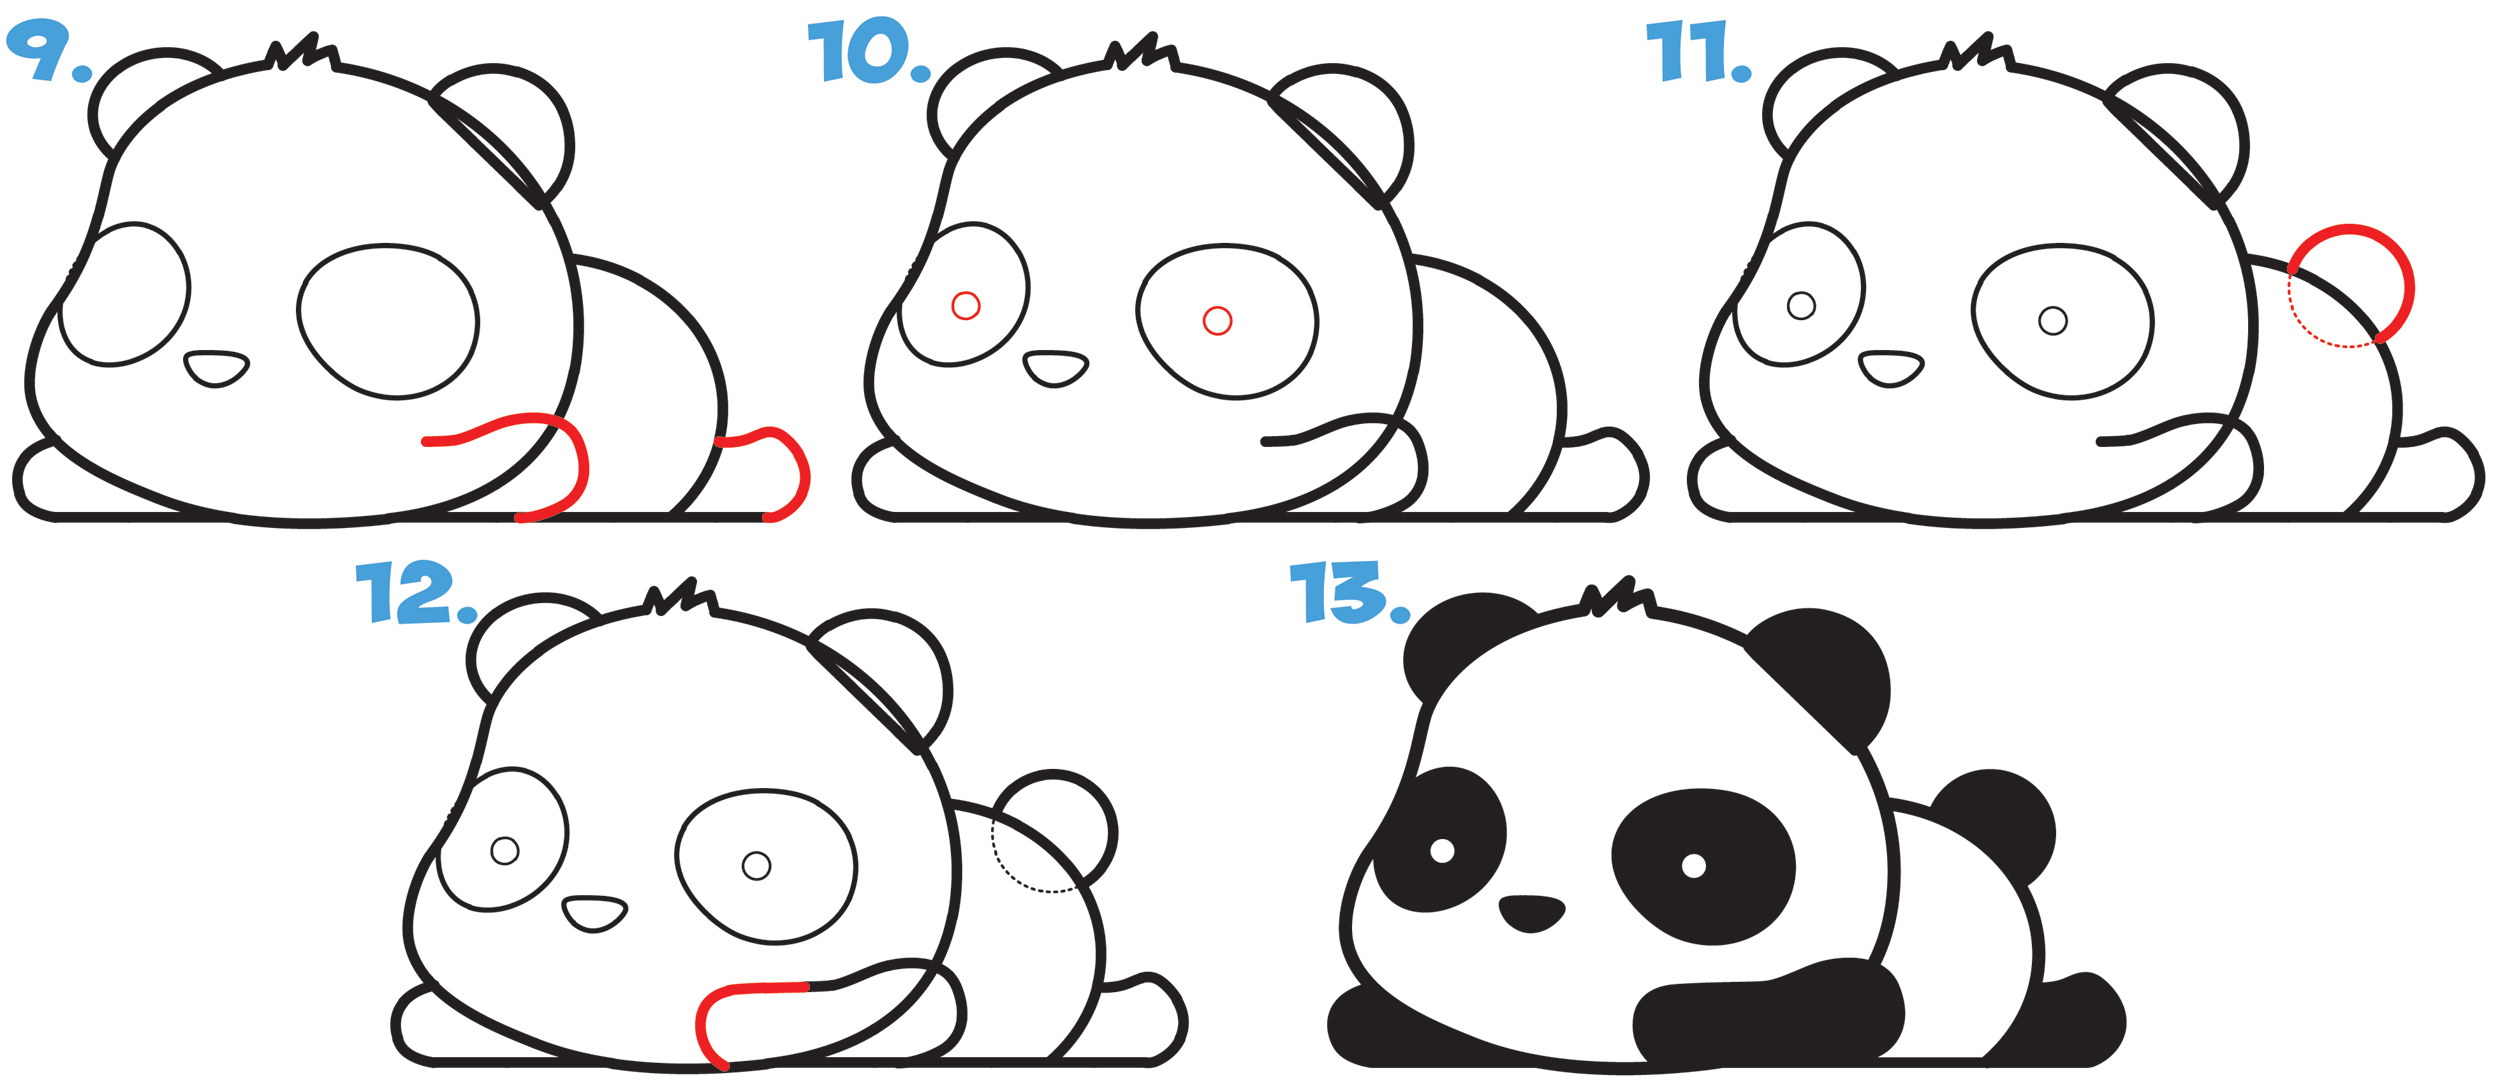 How to Draw a Super Cute Kawaii Panda Bear Laying Down Easy Step by Step Drawing Tutorial for Kids & Beginners